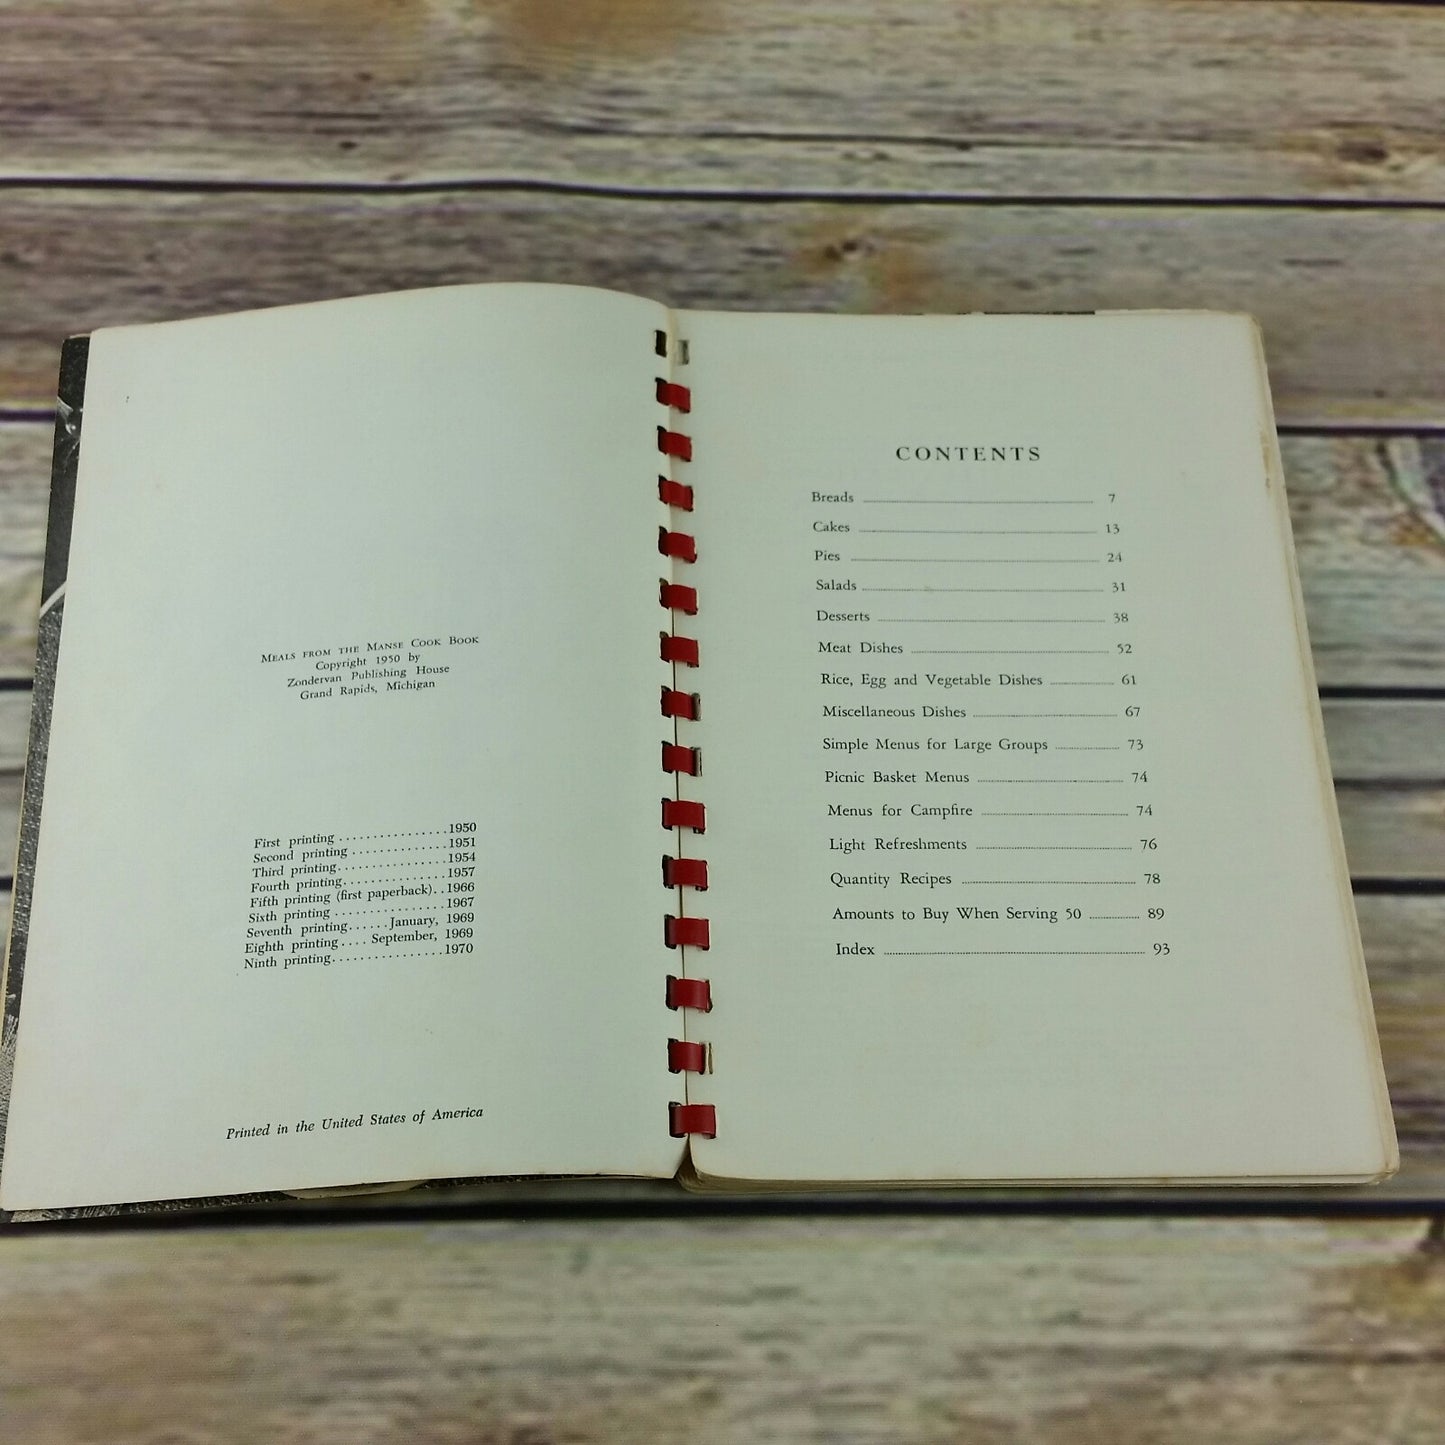 Vintage Cookbook Meals from the Manse Great Preachers Wives Recipes 1970 Spiral Bound - At Grandma's Table